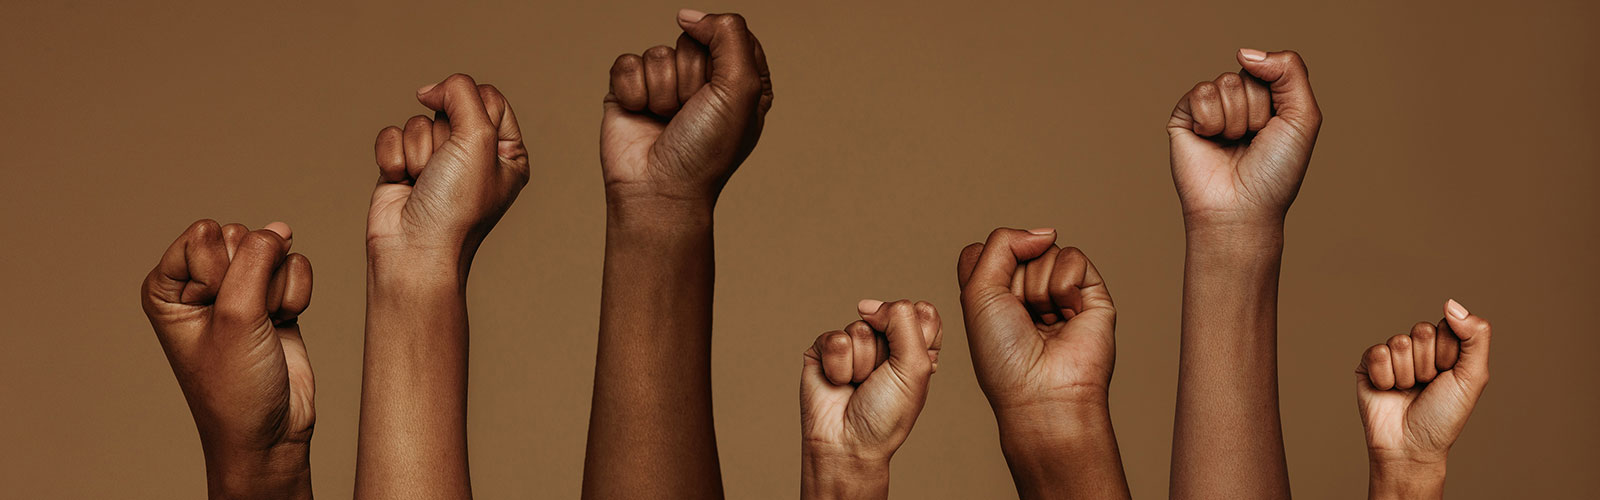 fists raised in various shades of brown